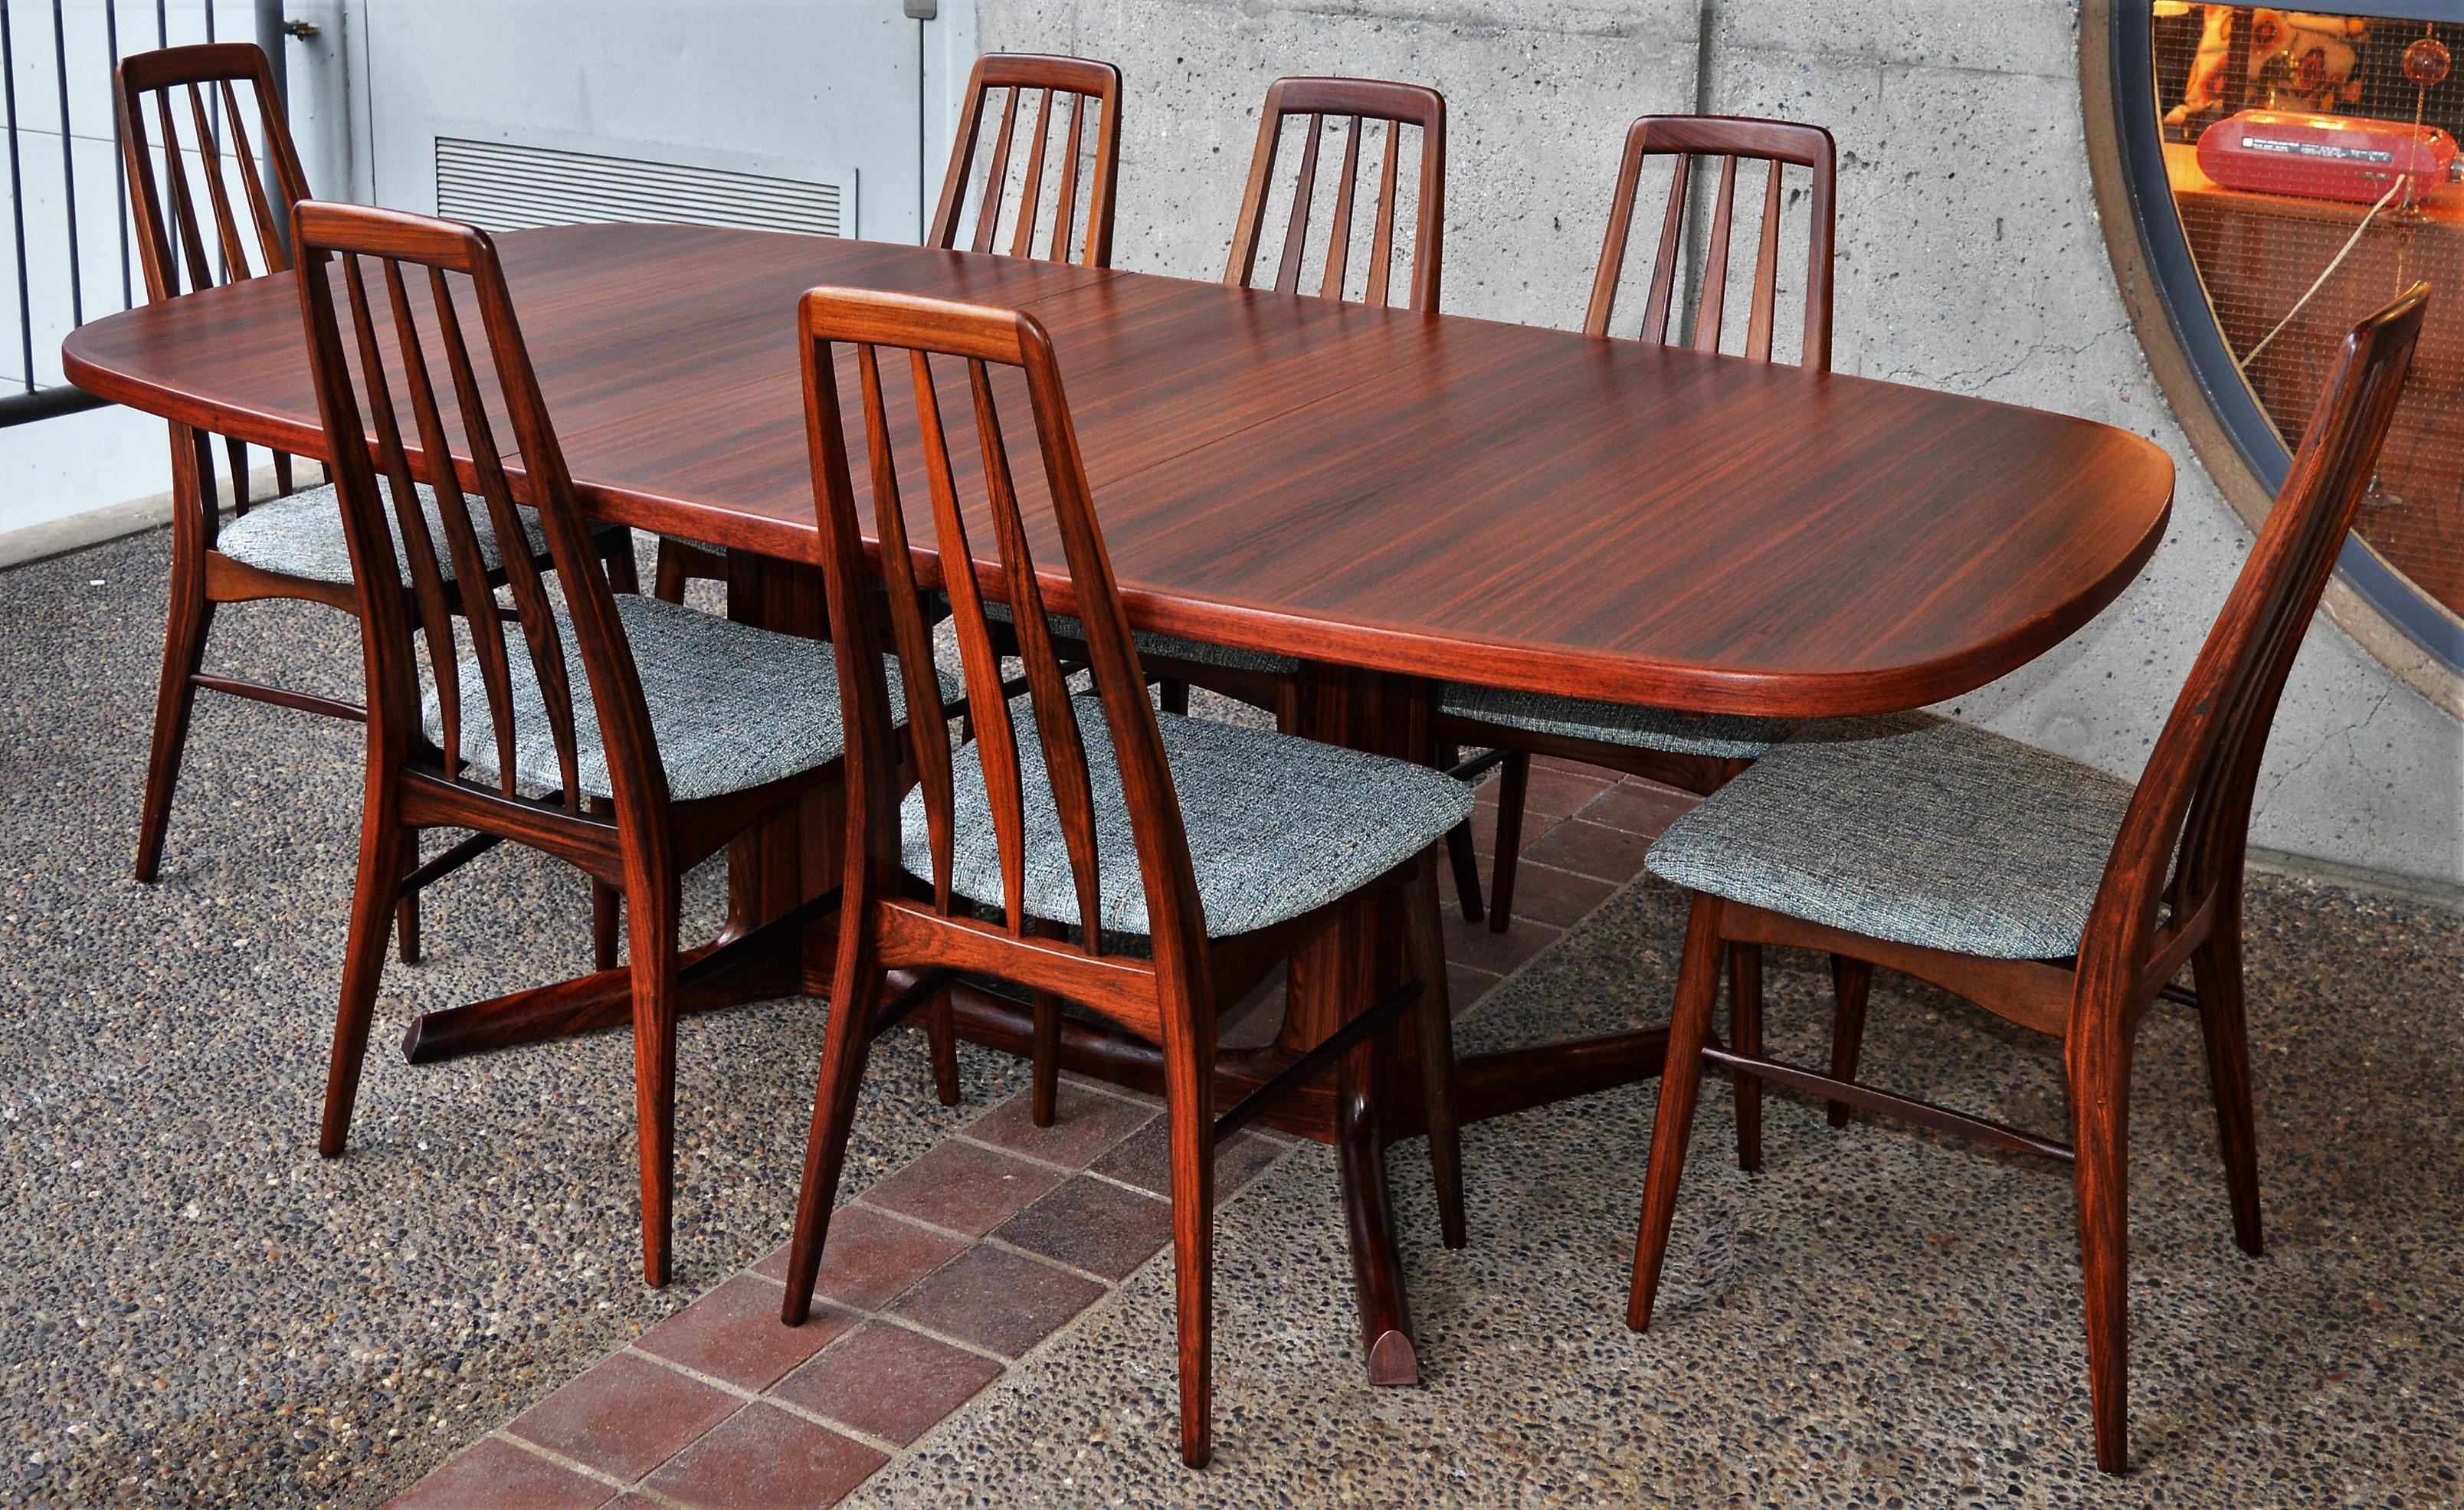 This gorgeous set of 7 Koefoeds Hornslet rosewood Eva chairs are known for their comfort, due to the ergonomic contoured lumbar support. Designed in the 1960s by Niels Koefoed and branded with the makers mark and the Danish Control logo underneath.